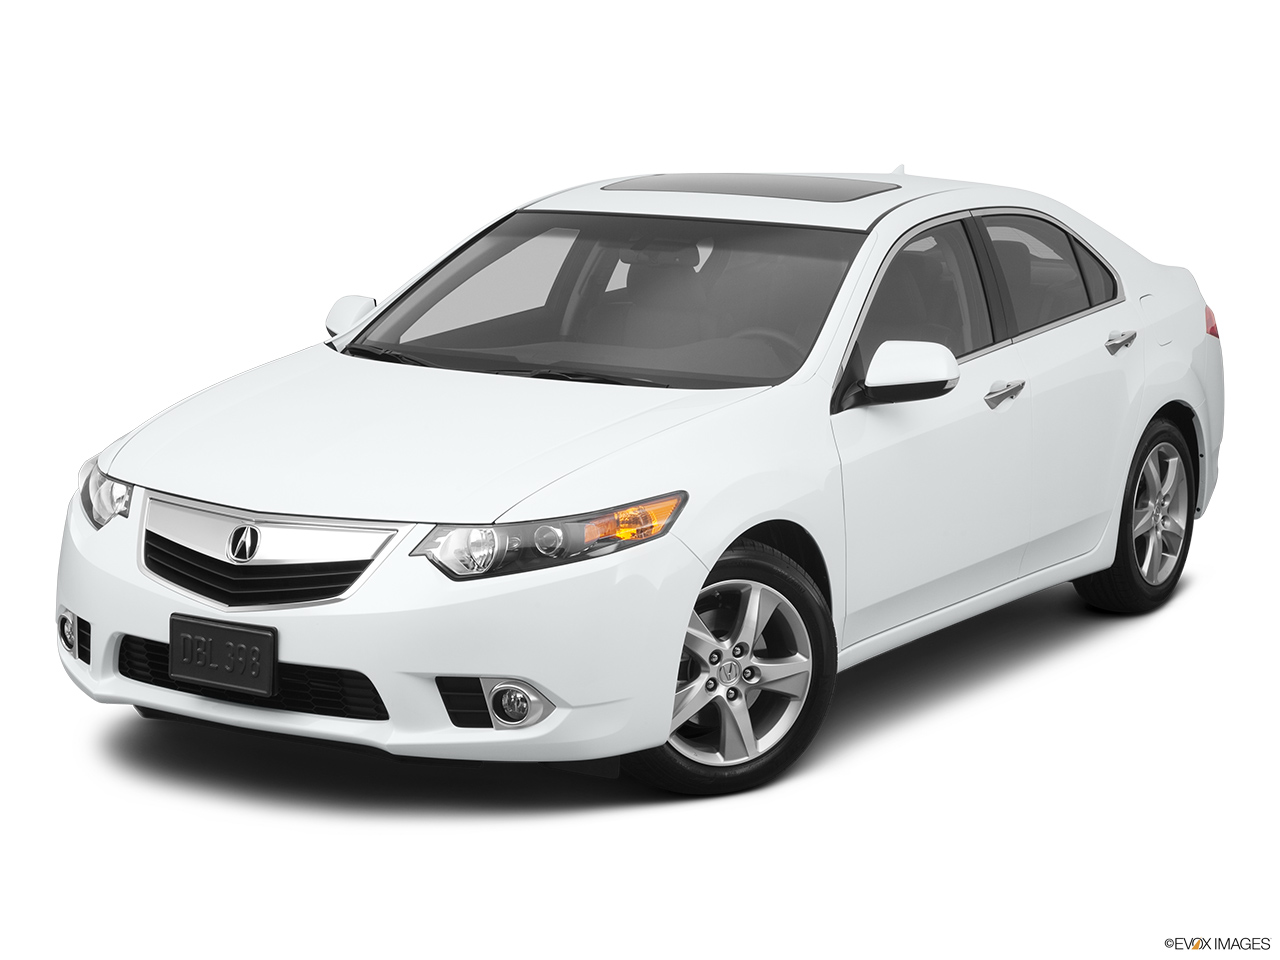 2011 Acura TSX TSX 5-speed Automatic Front angle view. 